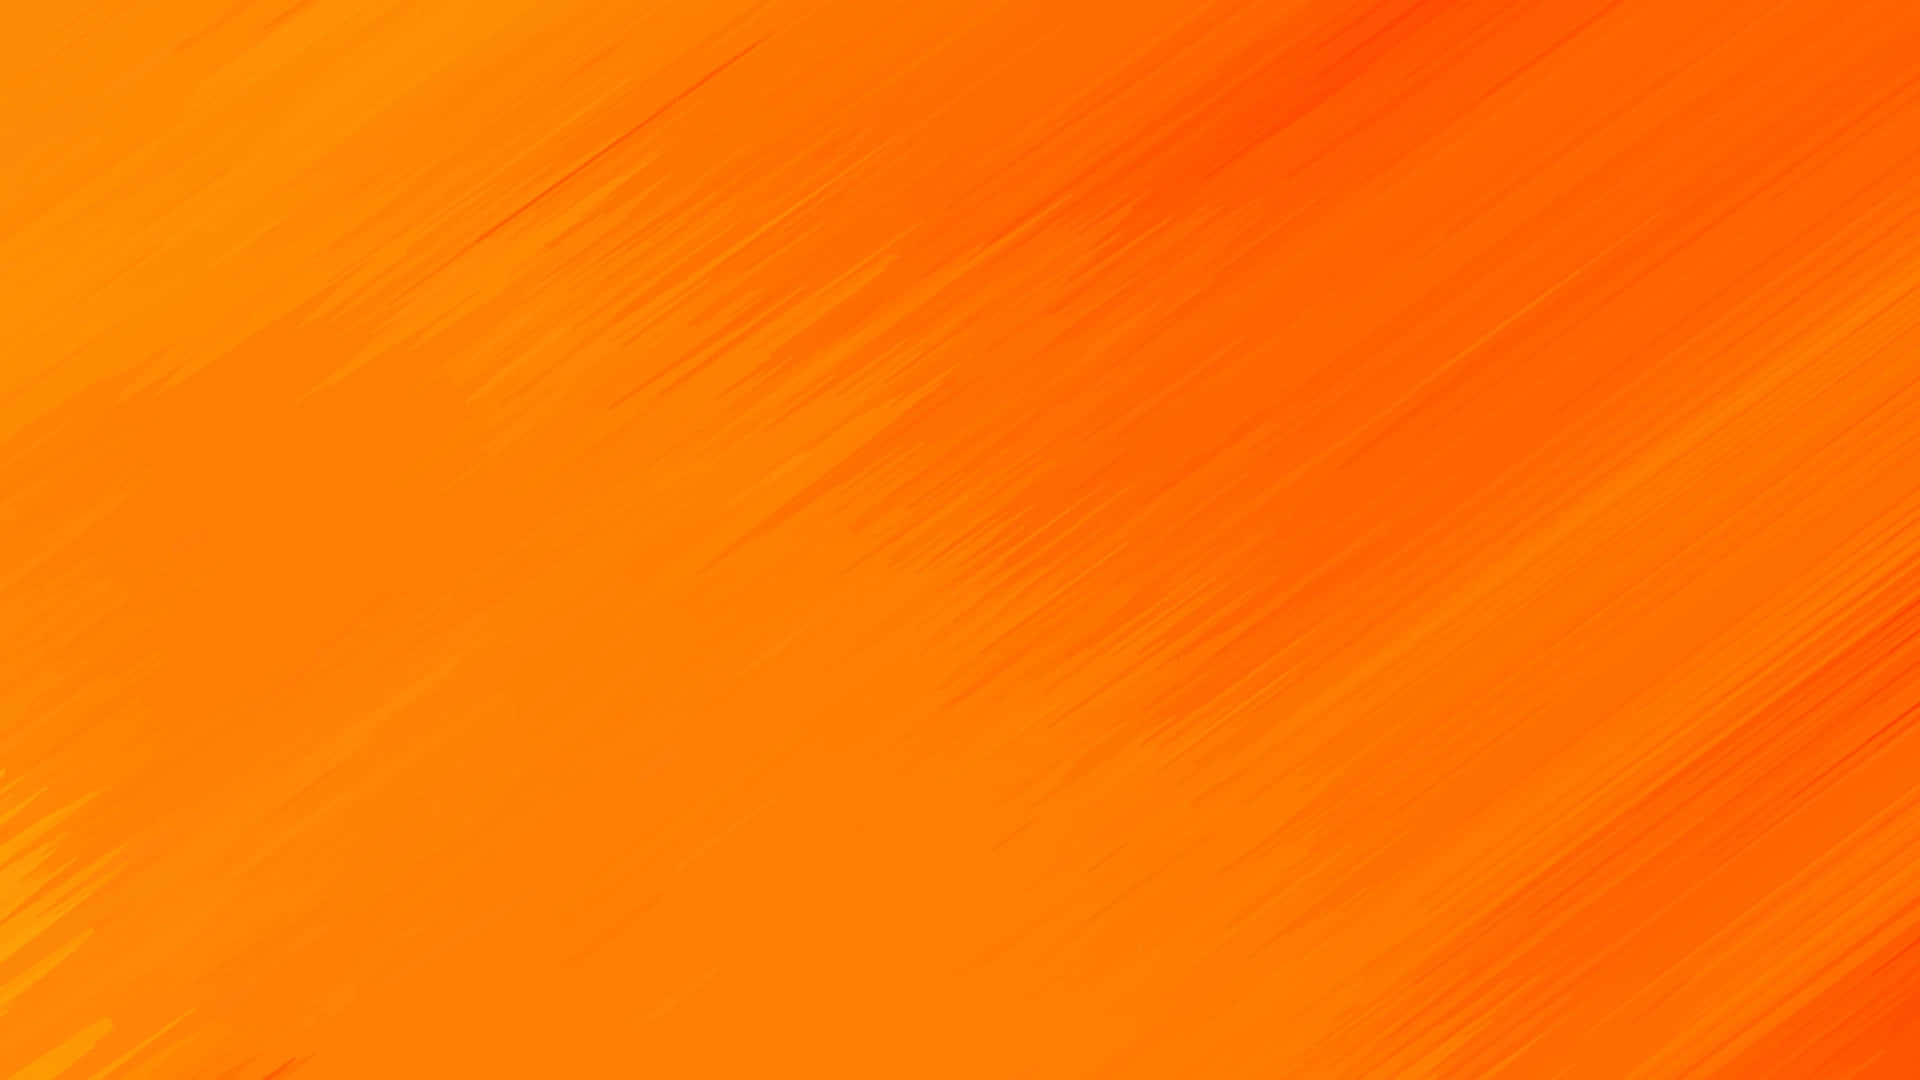 Orange Abstract Background With A Striped Pattern Wallpaper